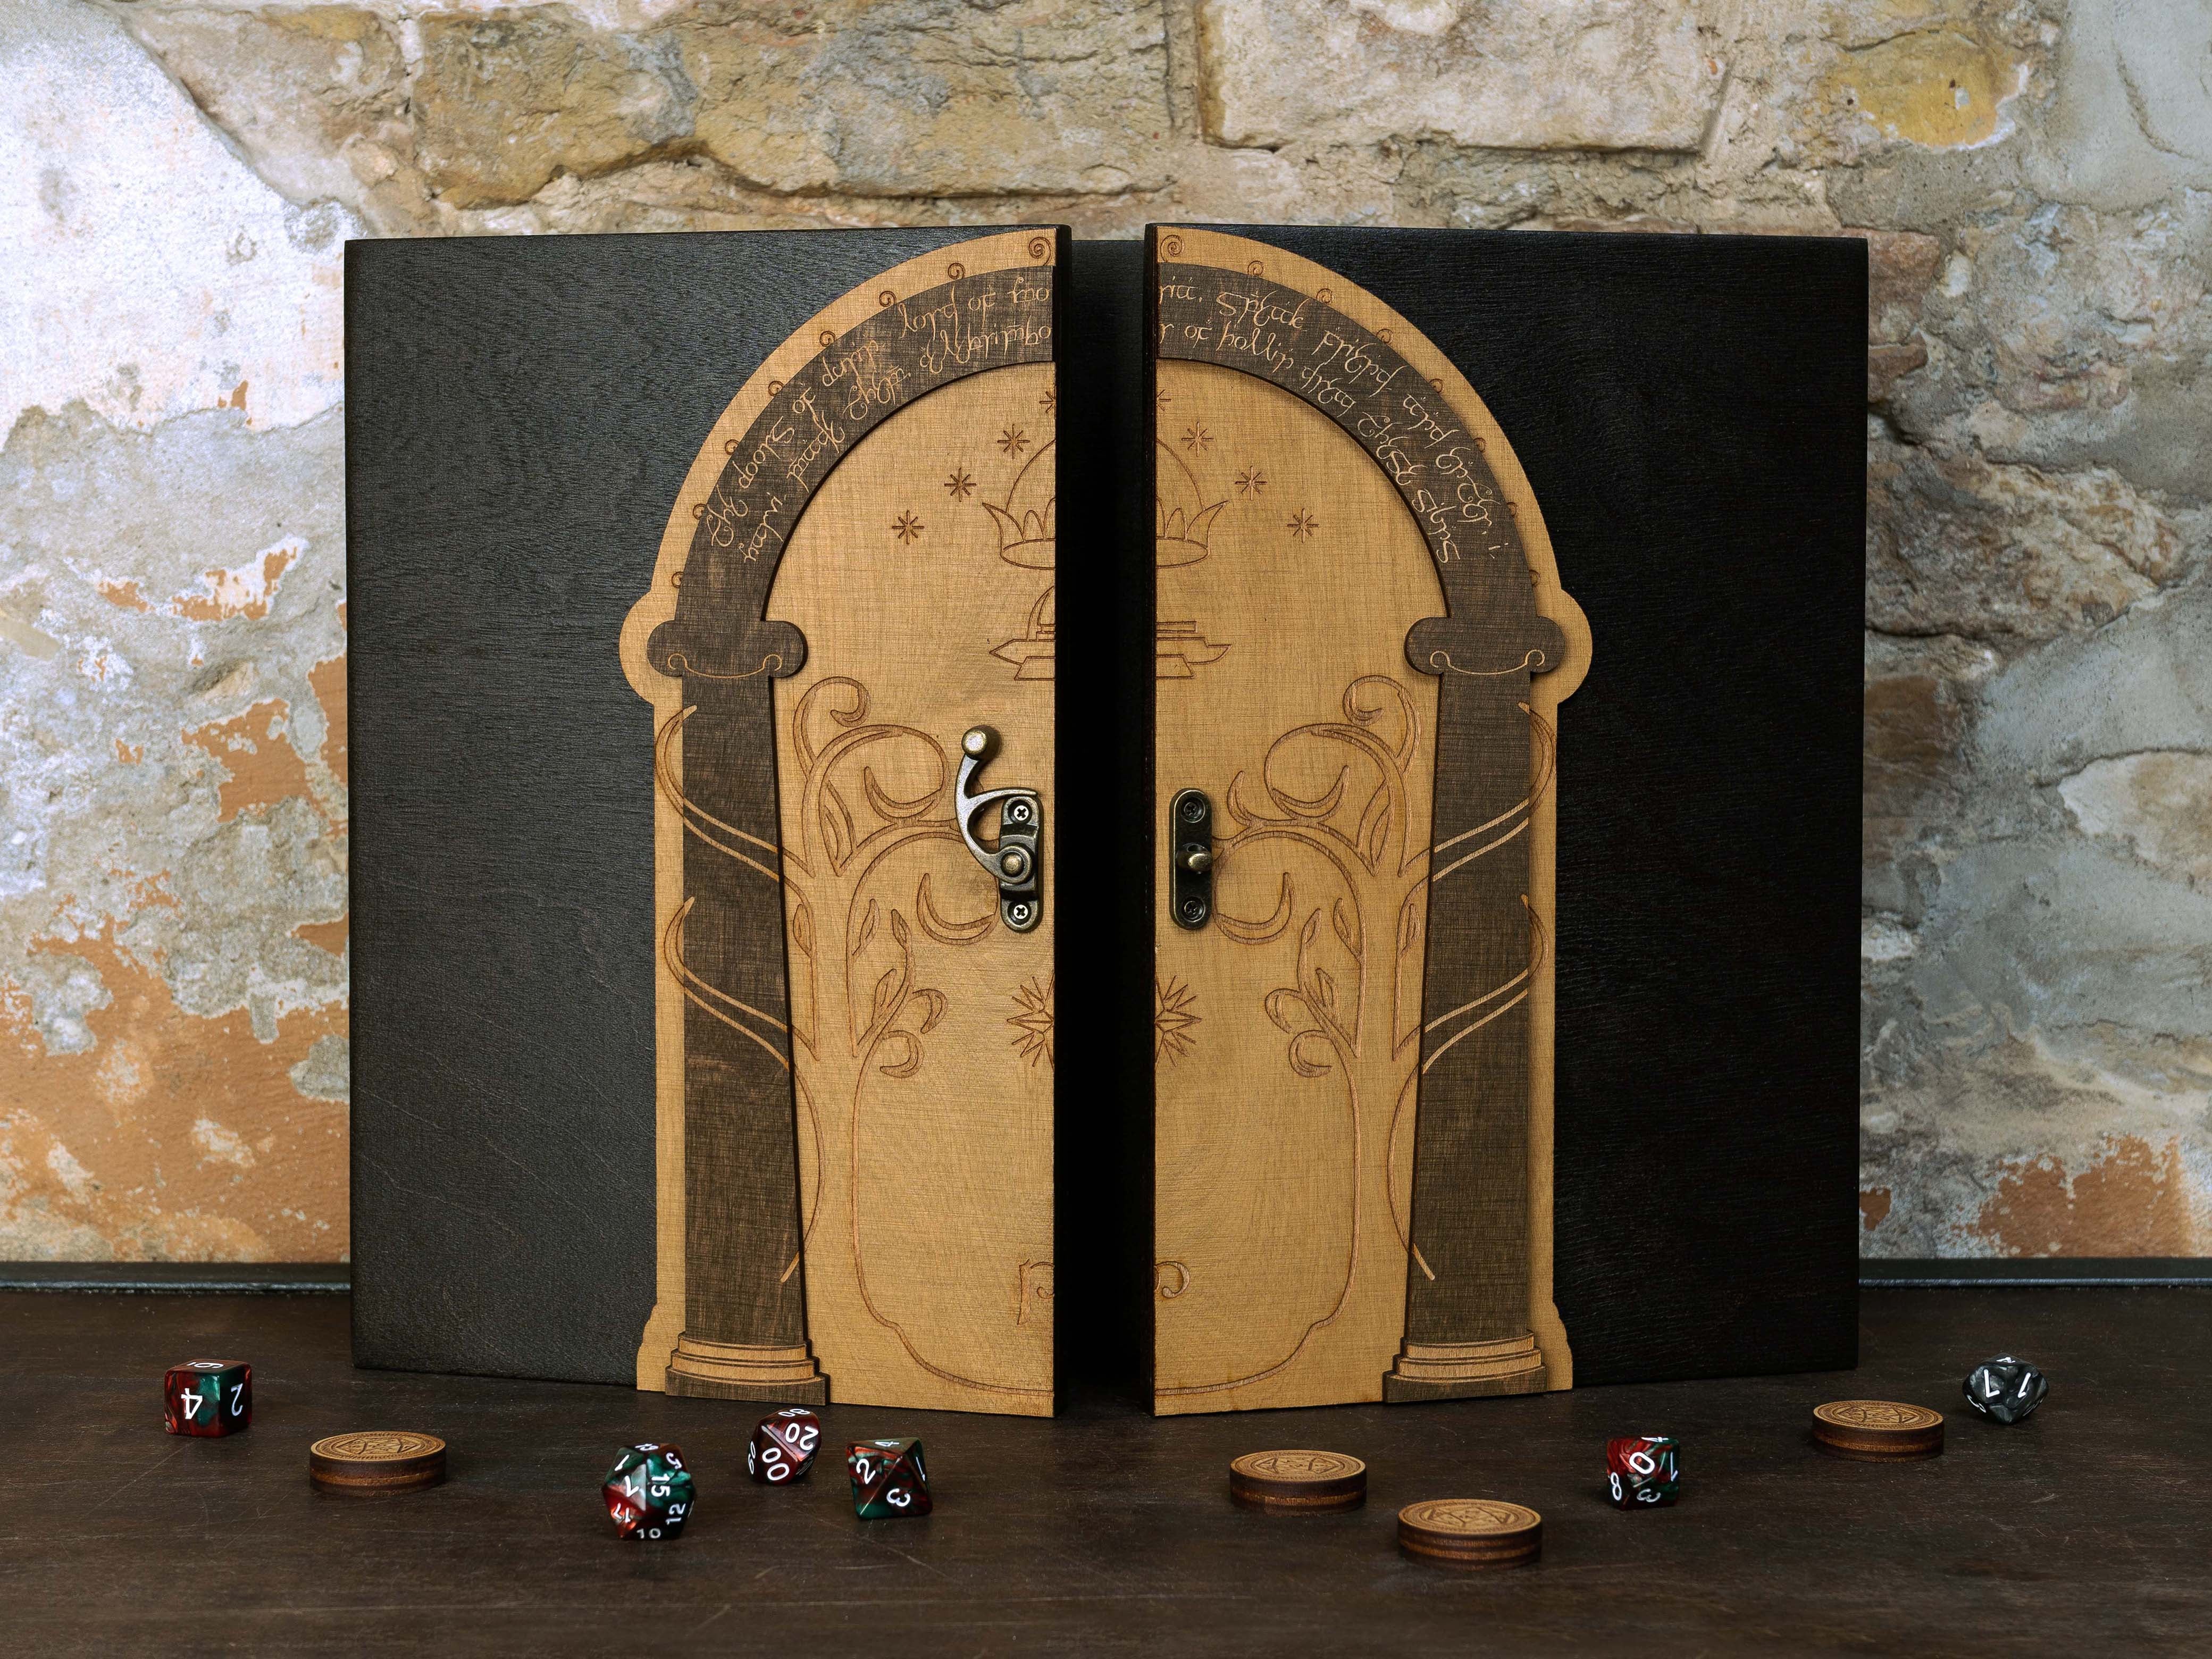 Lord of the Rings Map Dungeon Master screen with magnets, Dungeon master screens - GravisCup